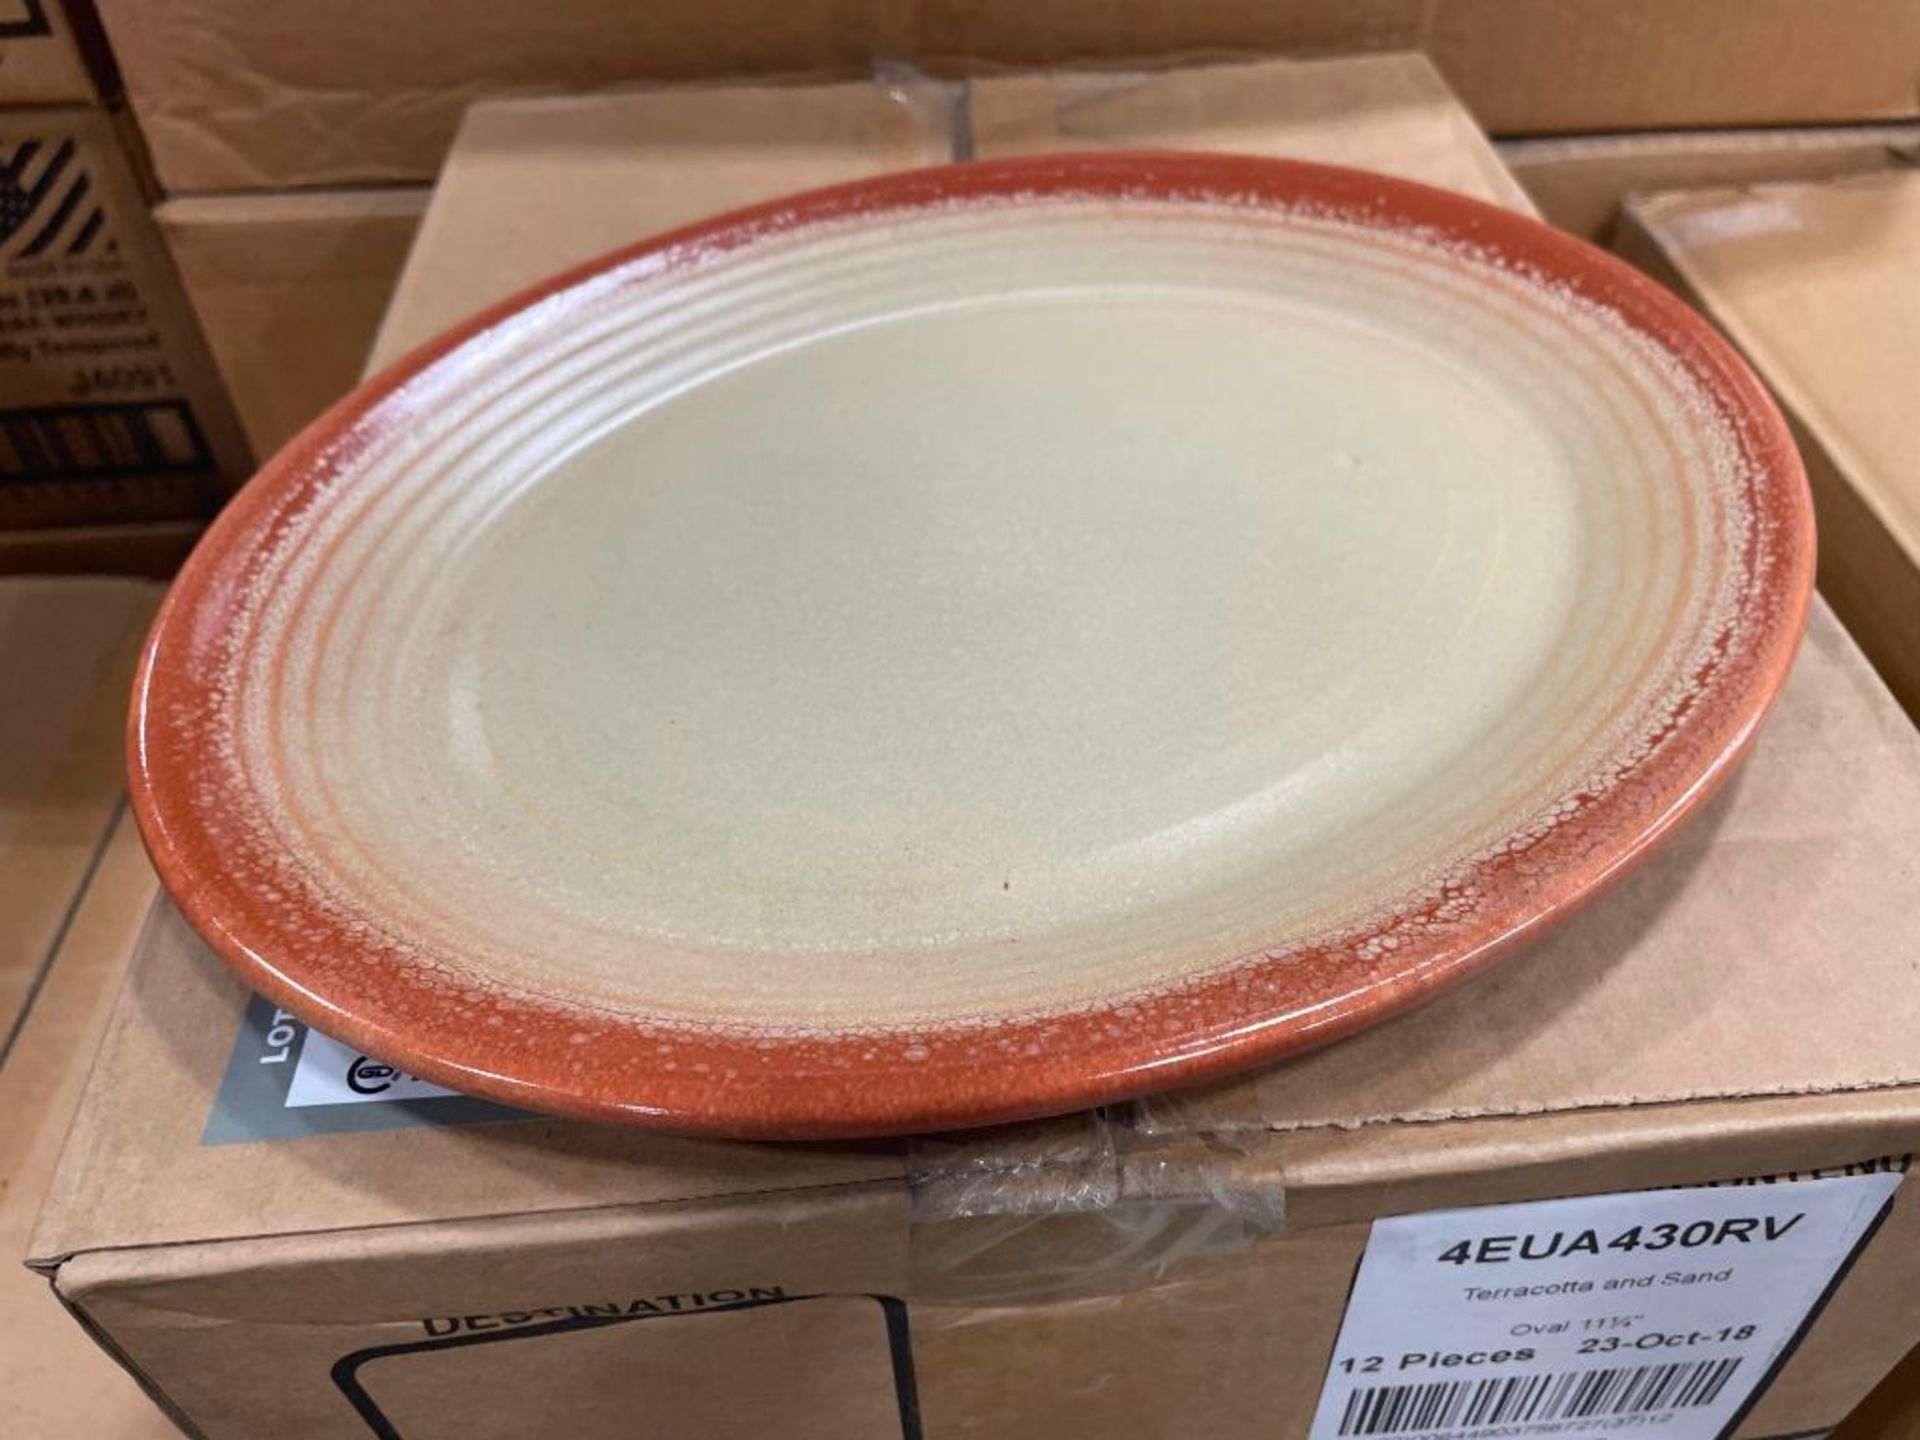 2 CASES OF DUDSON TERRACOTTA & SAND 11 1/4" OVAL PLATE - 12/CASE, MADE IN ENGLAND - Image 4 of 4